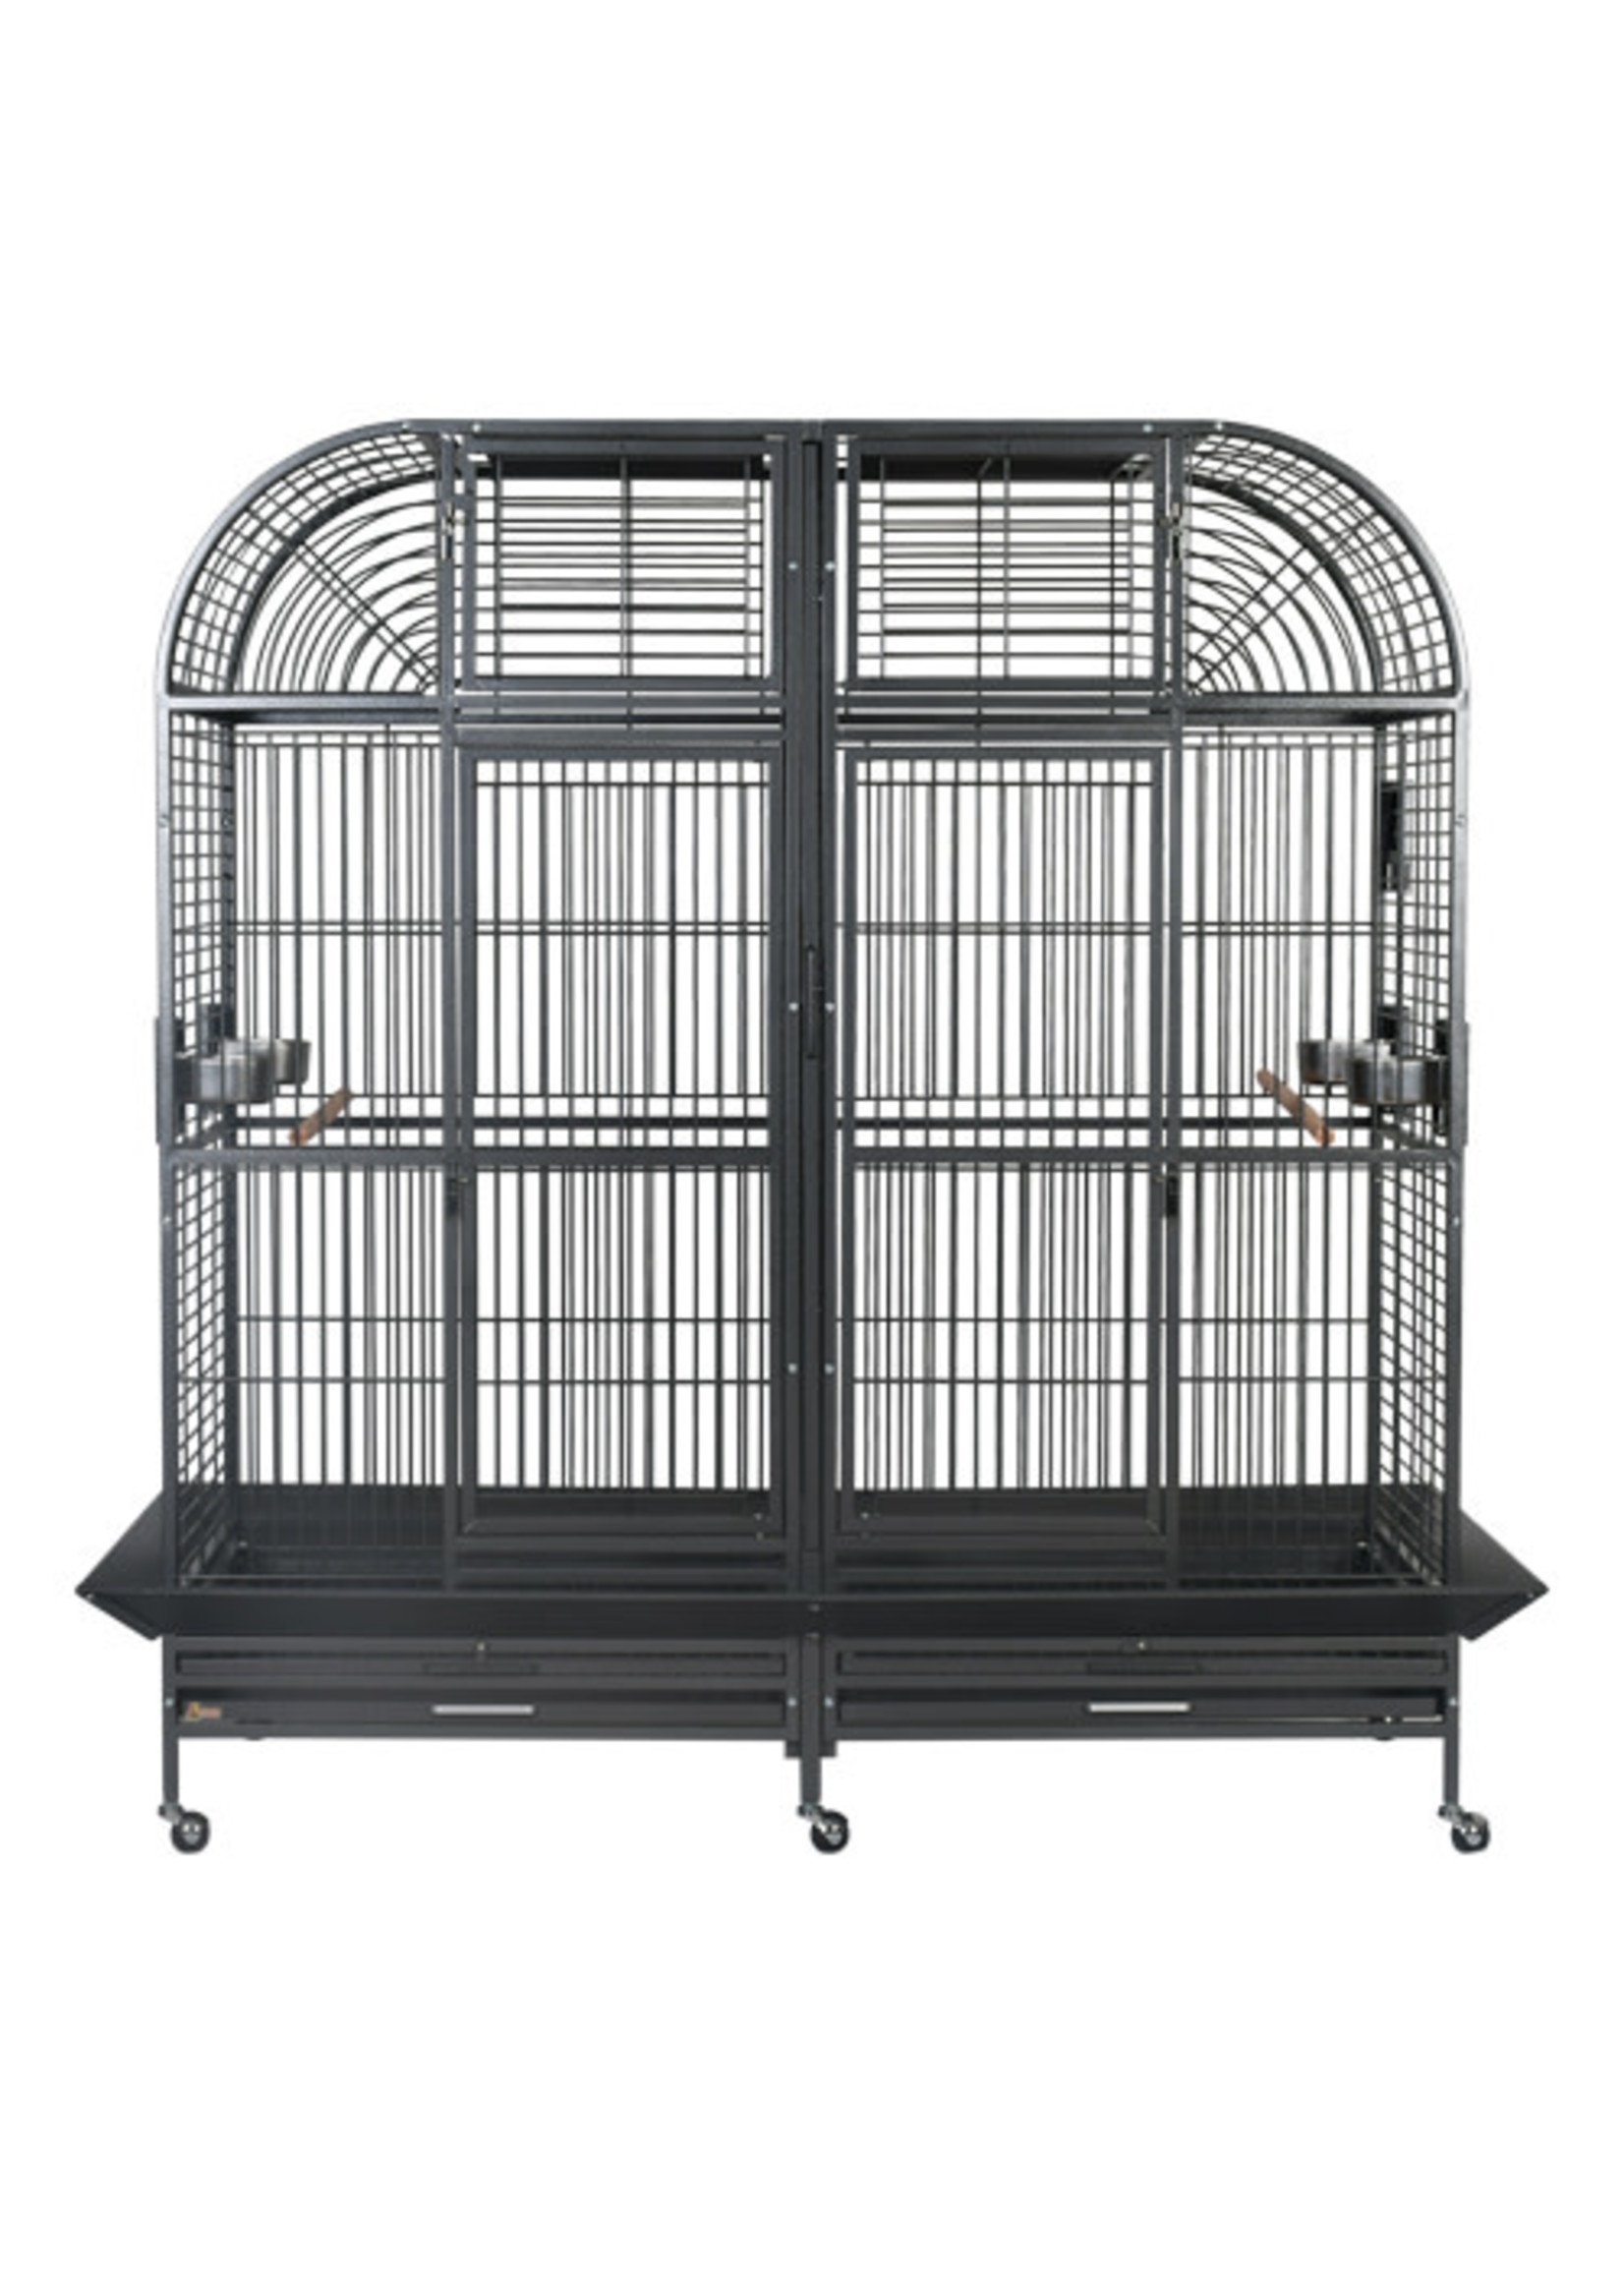 SLT 6432 SUPERIOR LINE XL DOUBLE CAGE - Chirp N Dales Pet Supply